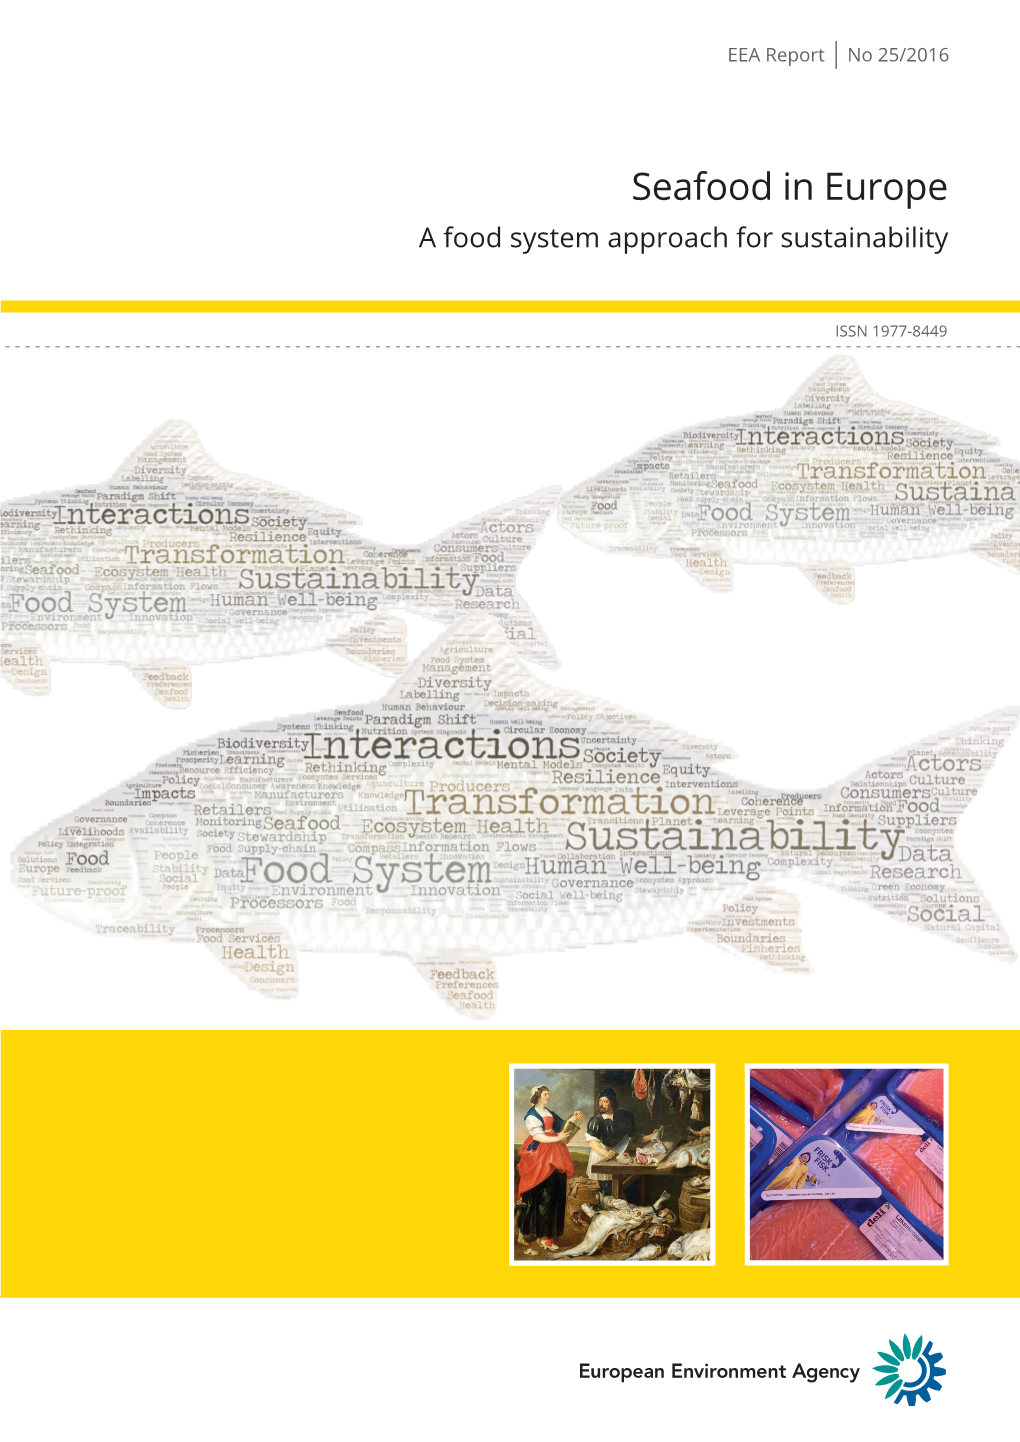 Seafood in Europe — a Food System Approach for Sustainability